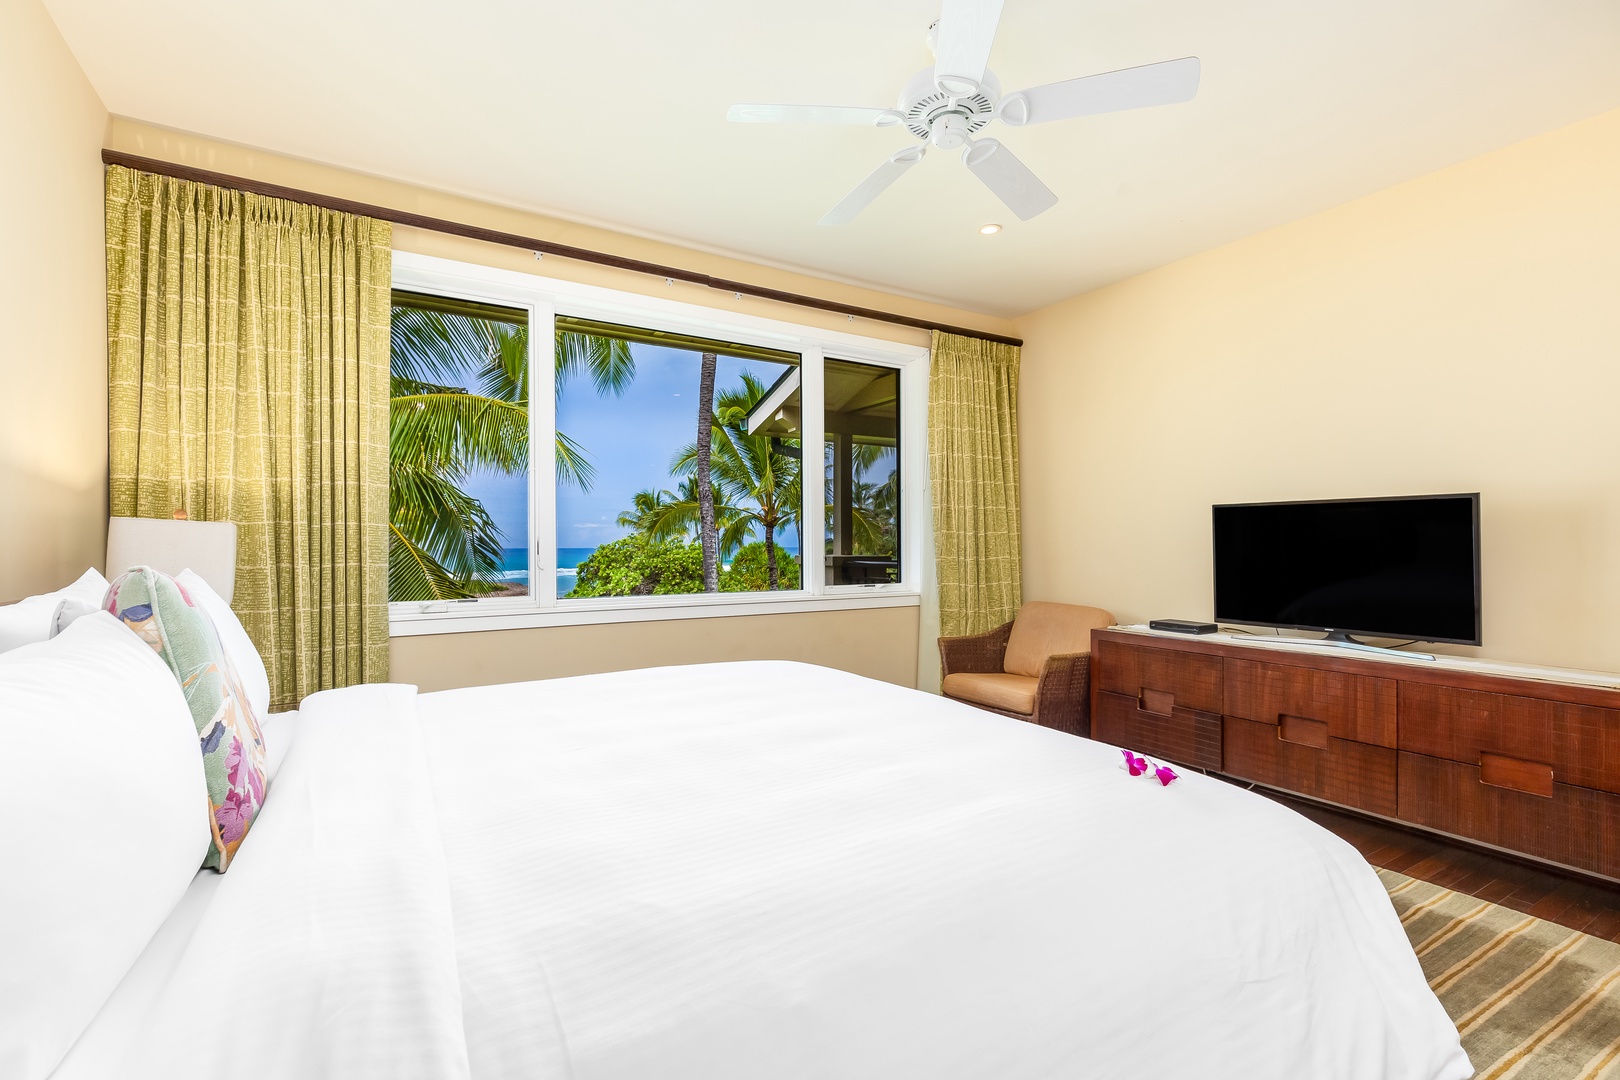 Kahuku Vacation Rentals, OFB Turtle Bay Villas 301 - HD Smart TVs are available in all four bedrooms